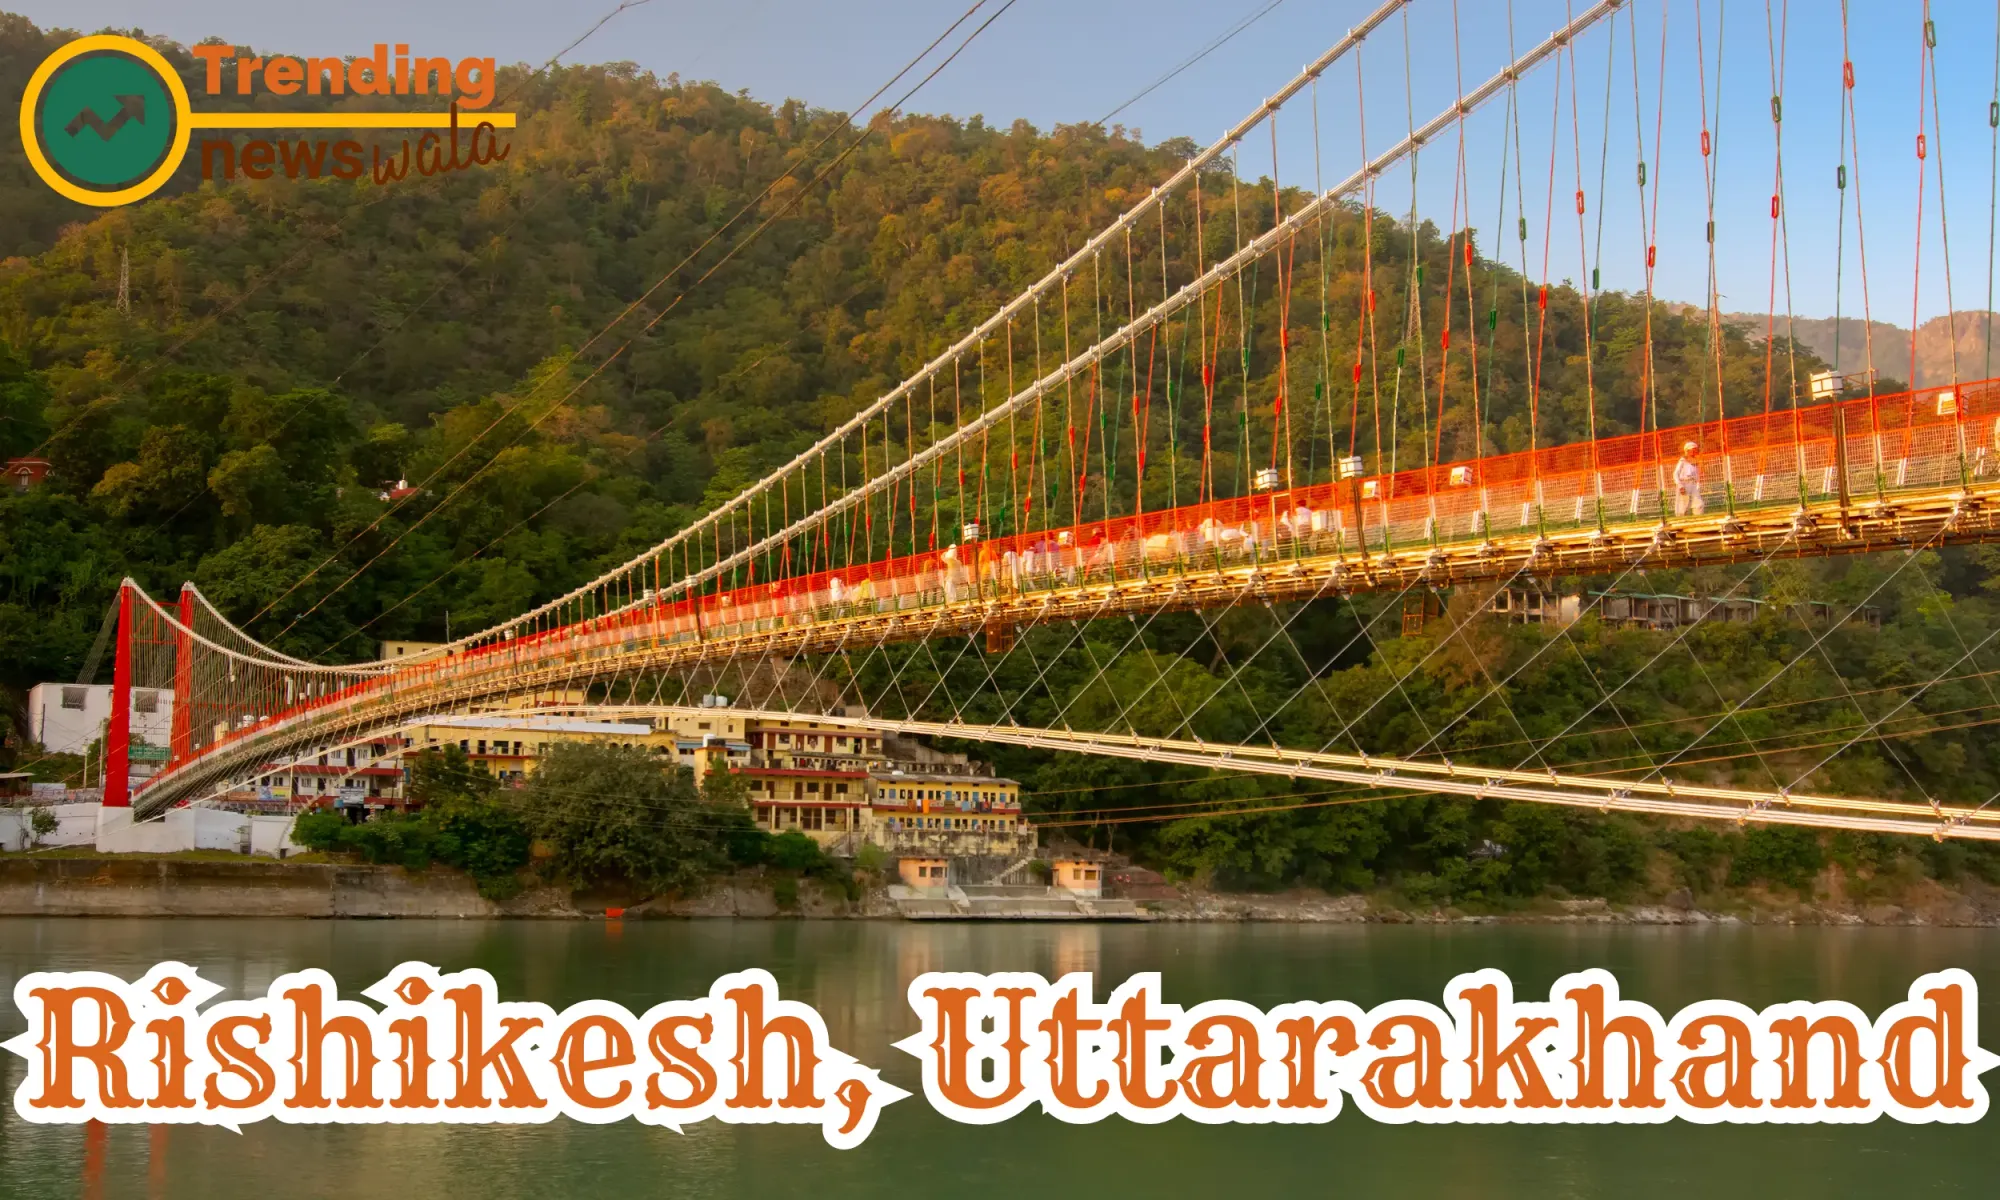 Rishikesh, nestled in the foothills of the Himalayas in the northern state of Uttarakhand